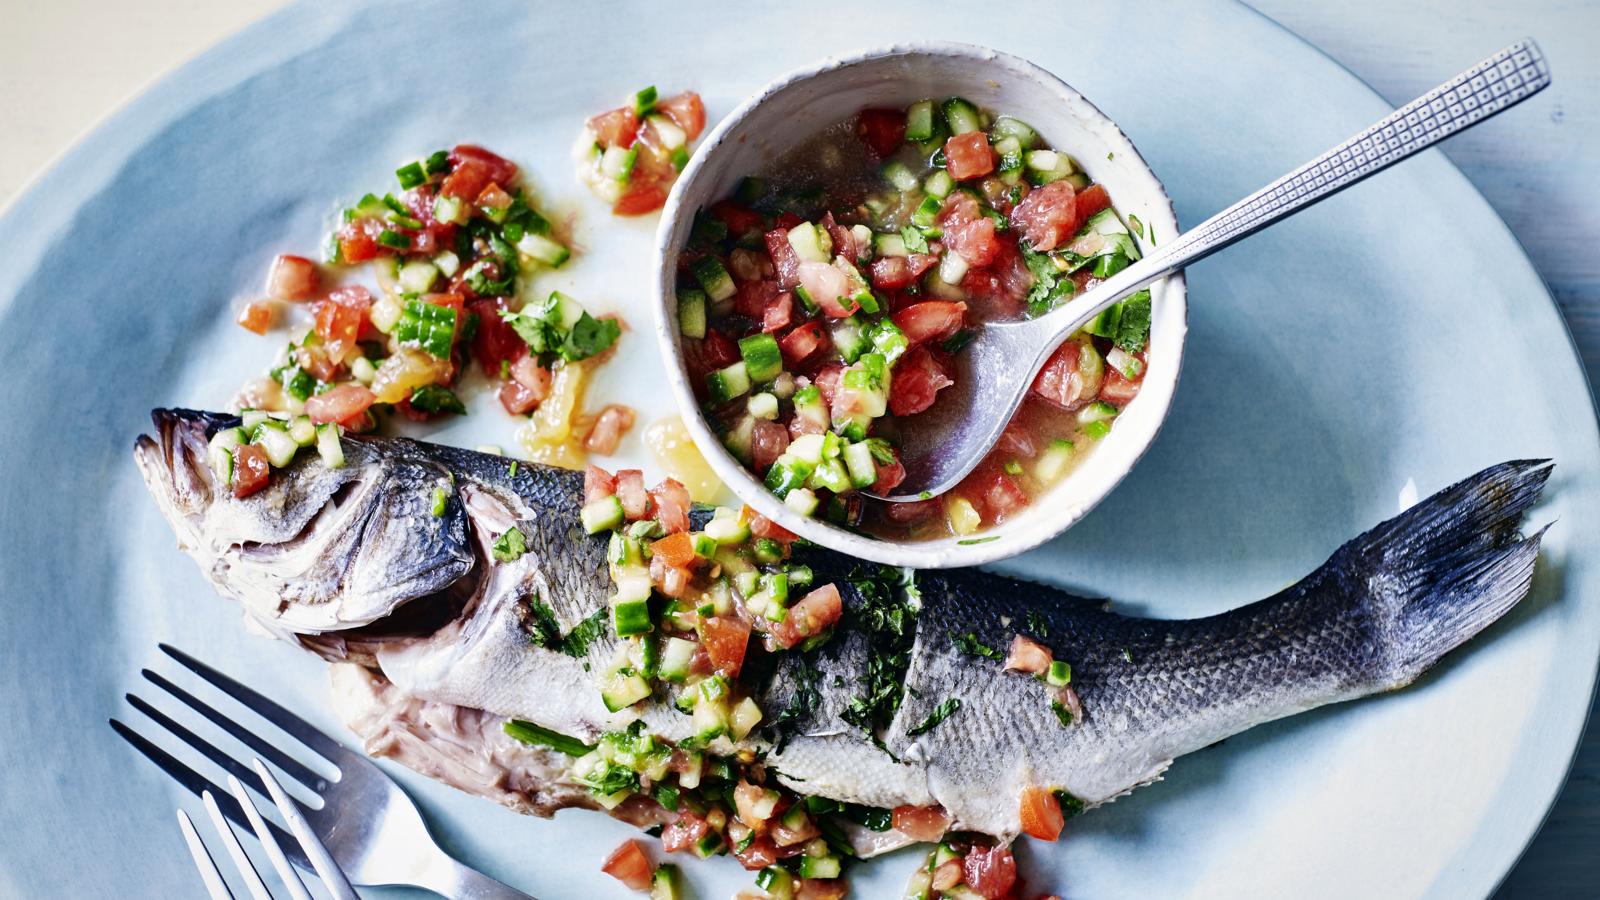 Whole sea bass with warmed tomato and citrus salsa recipe - BBC Food